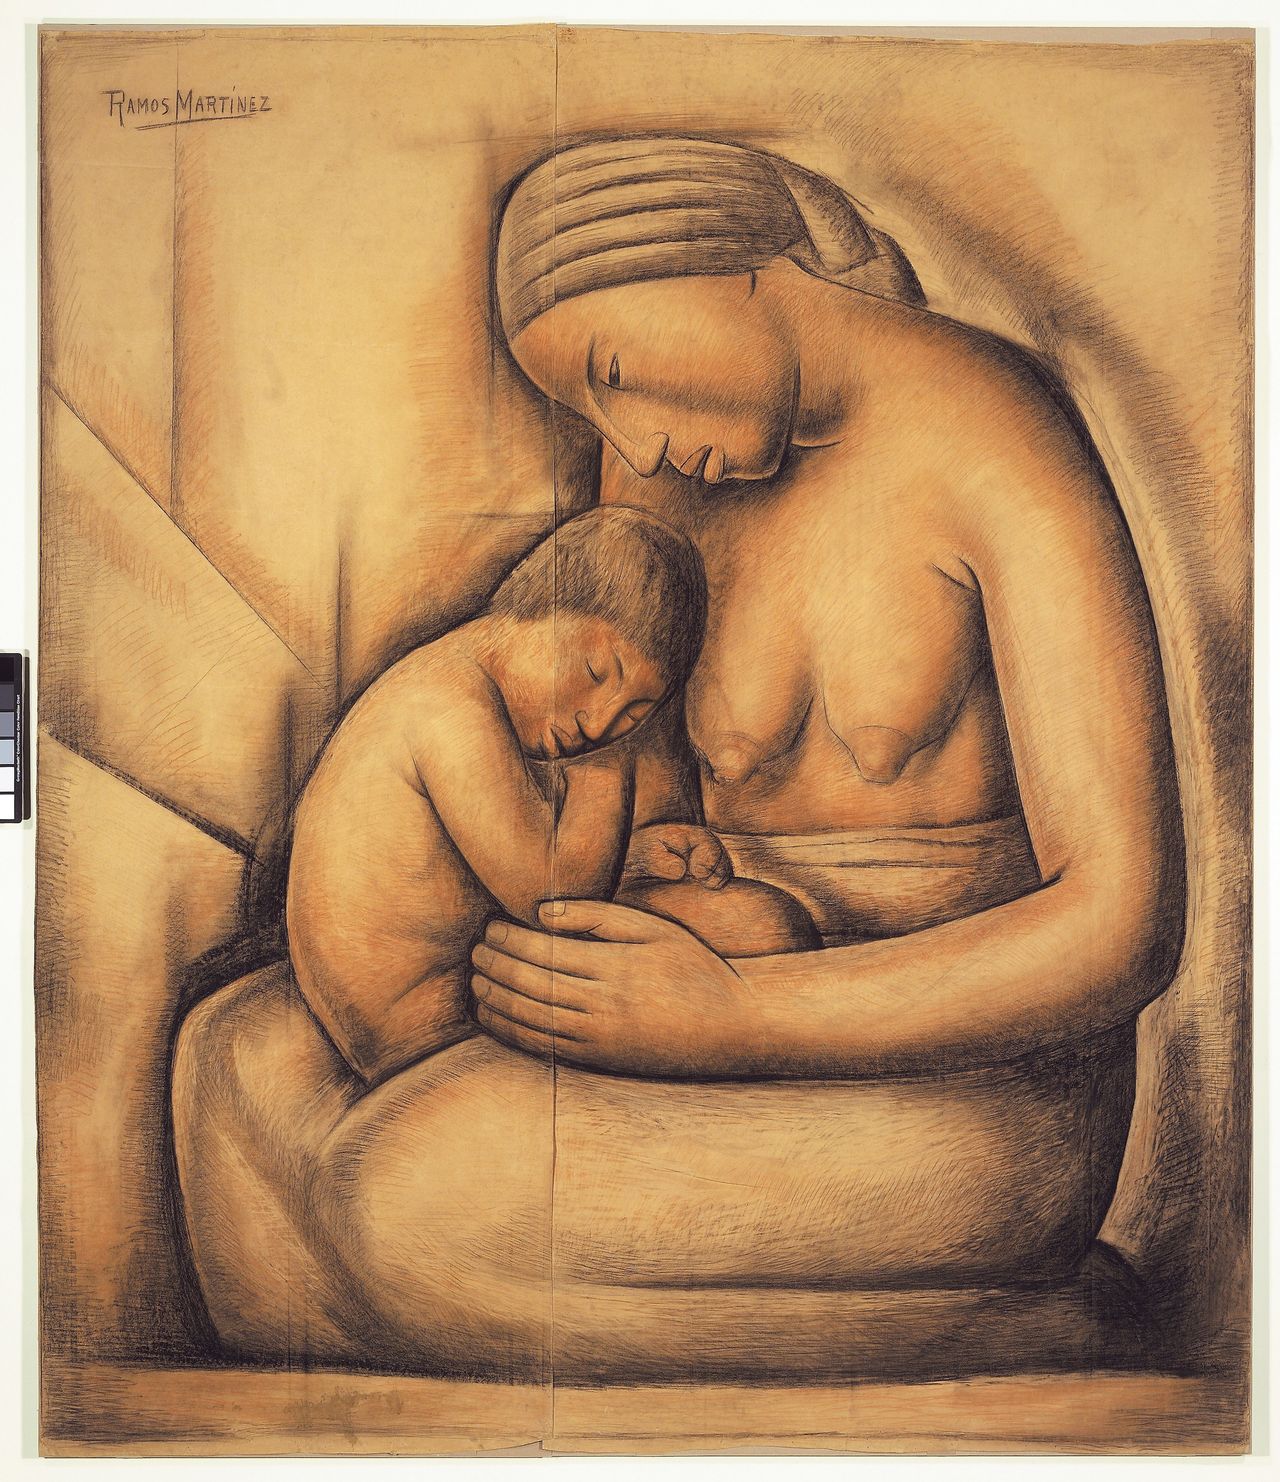 Alfredo Ramos Martínez, "La Madre India / Indian Mother," ca. 1936. Crayon. The San Diego Museum of Art. Gift of the artist.